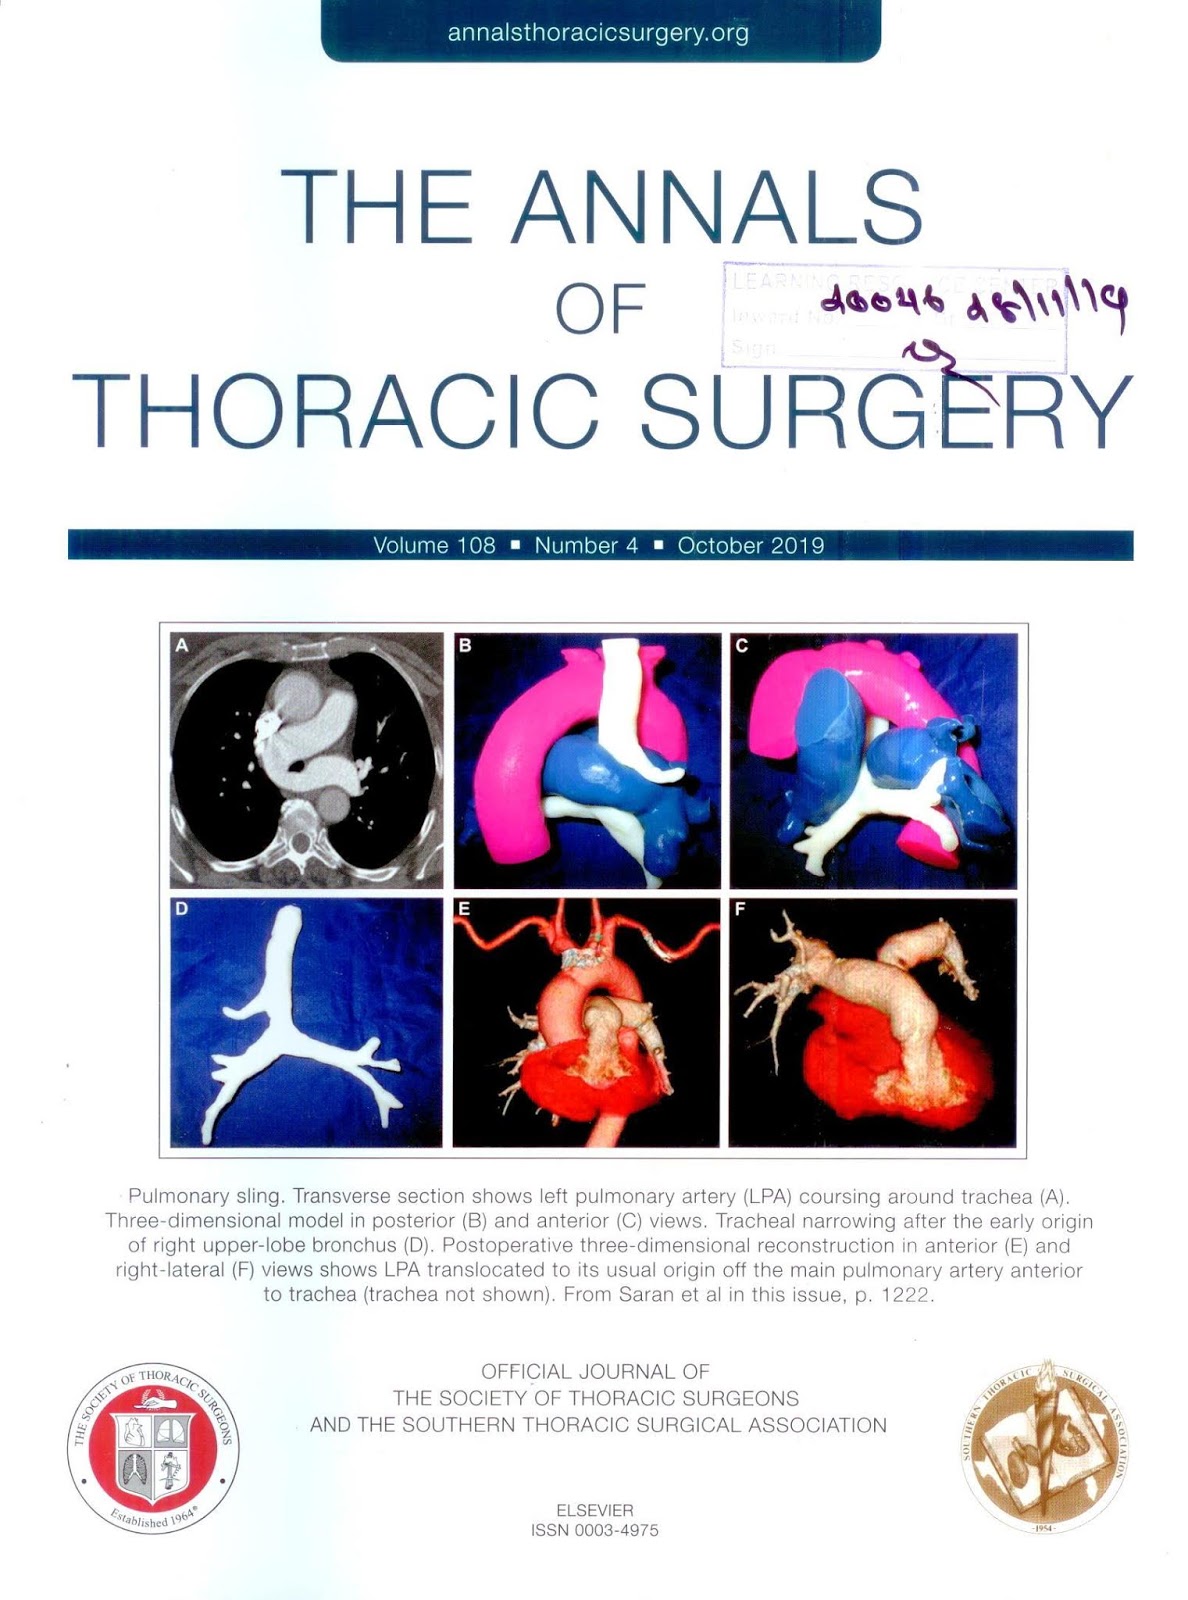 https://www.annalsthoracicsurgery.org/issue/S0003-4975(18)X0021-6